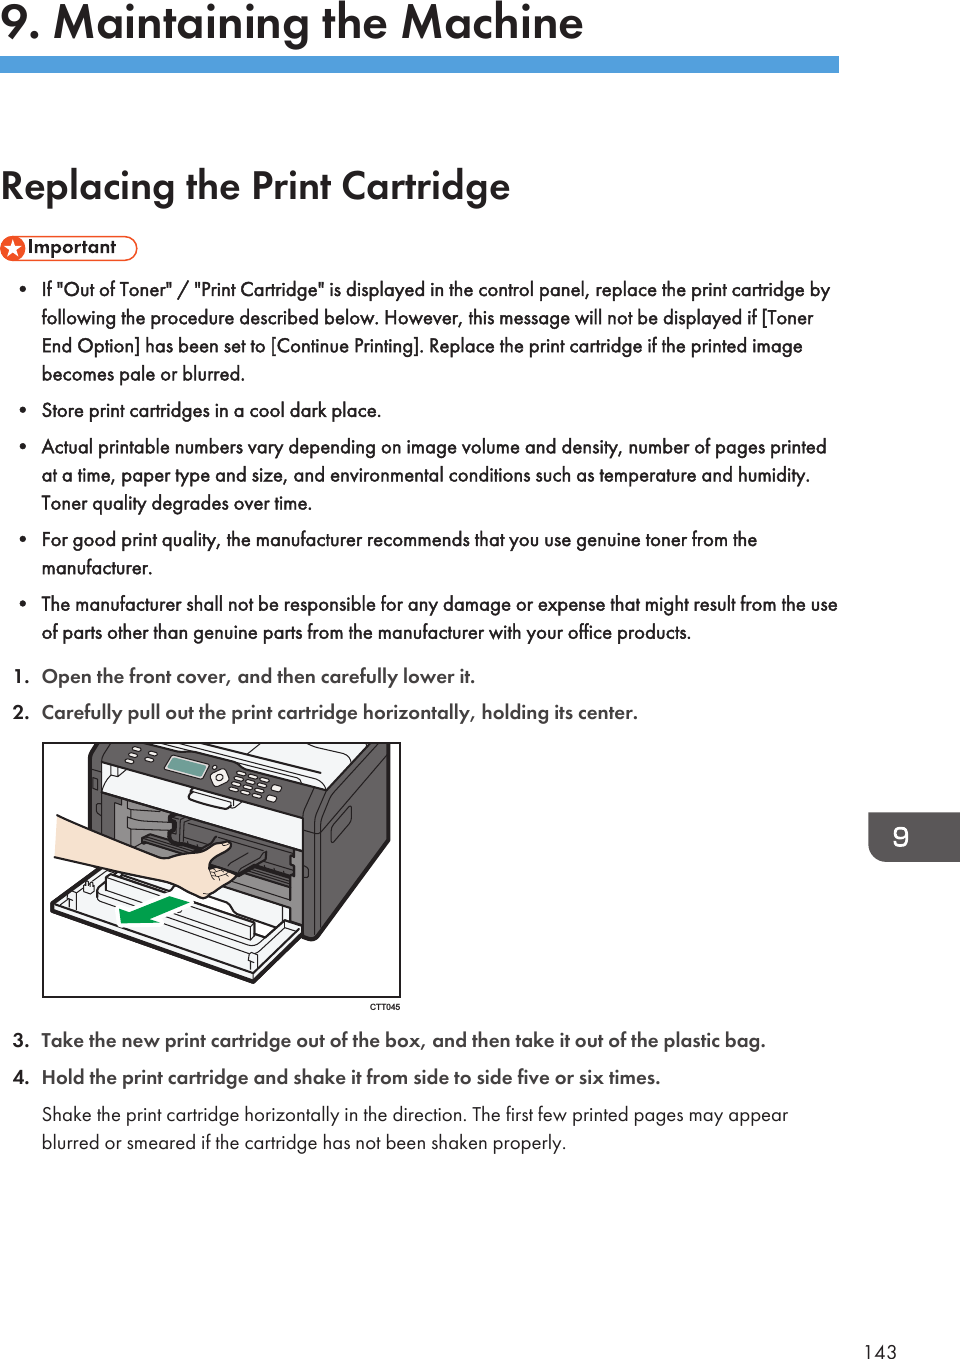 9. Maintaining the MachineReplacing the Print Cartridge• If &quot;Out of Toner&quot; / &quot;Print Cartridge&quot; is displayed in the control panel, replace the print cartridge byfollowing the procedure described below. However, this message will not be displayed if [TonerEnd Option] has been set to [Continue Printing]. Replace the print cartridge if the printed imagebecomes pale or blurred.• Store print cartridges in a cool dark place.• Actual printable numbers vary depending on image volume and density, number of pages printedat a time, paper type and size, and environmental conditions such as temperature and humidity.Toner quality degrades over time.• For good print quality, the manufacturer recommends that you use genuine toner from themanufacturer.• The manufacturer shall not be responsible for any damage or expense that might result from the useof parts other than genuine parts from the manufacturer with your office products.1. Open the front cover, and then carefully lower it.2. Carefully pull out the print cartridge horizontally, holding its center.CTT0453. Take the new print cartridge out of the box, and then take it out of the plastic bag.4. Hold the print cartridge and shake it from side to side five or six times.Shake the print cartridge horizontally in the direction. The first few printed pages may appearblurred or smeared if the cartridge has not been shaken properly.143